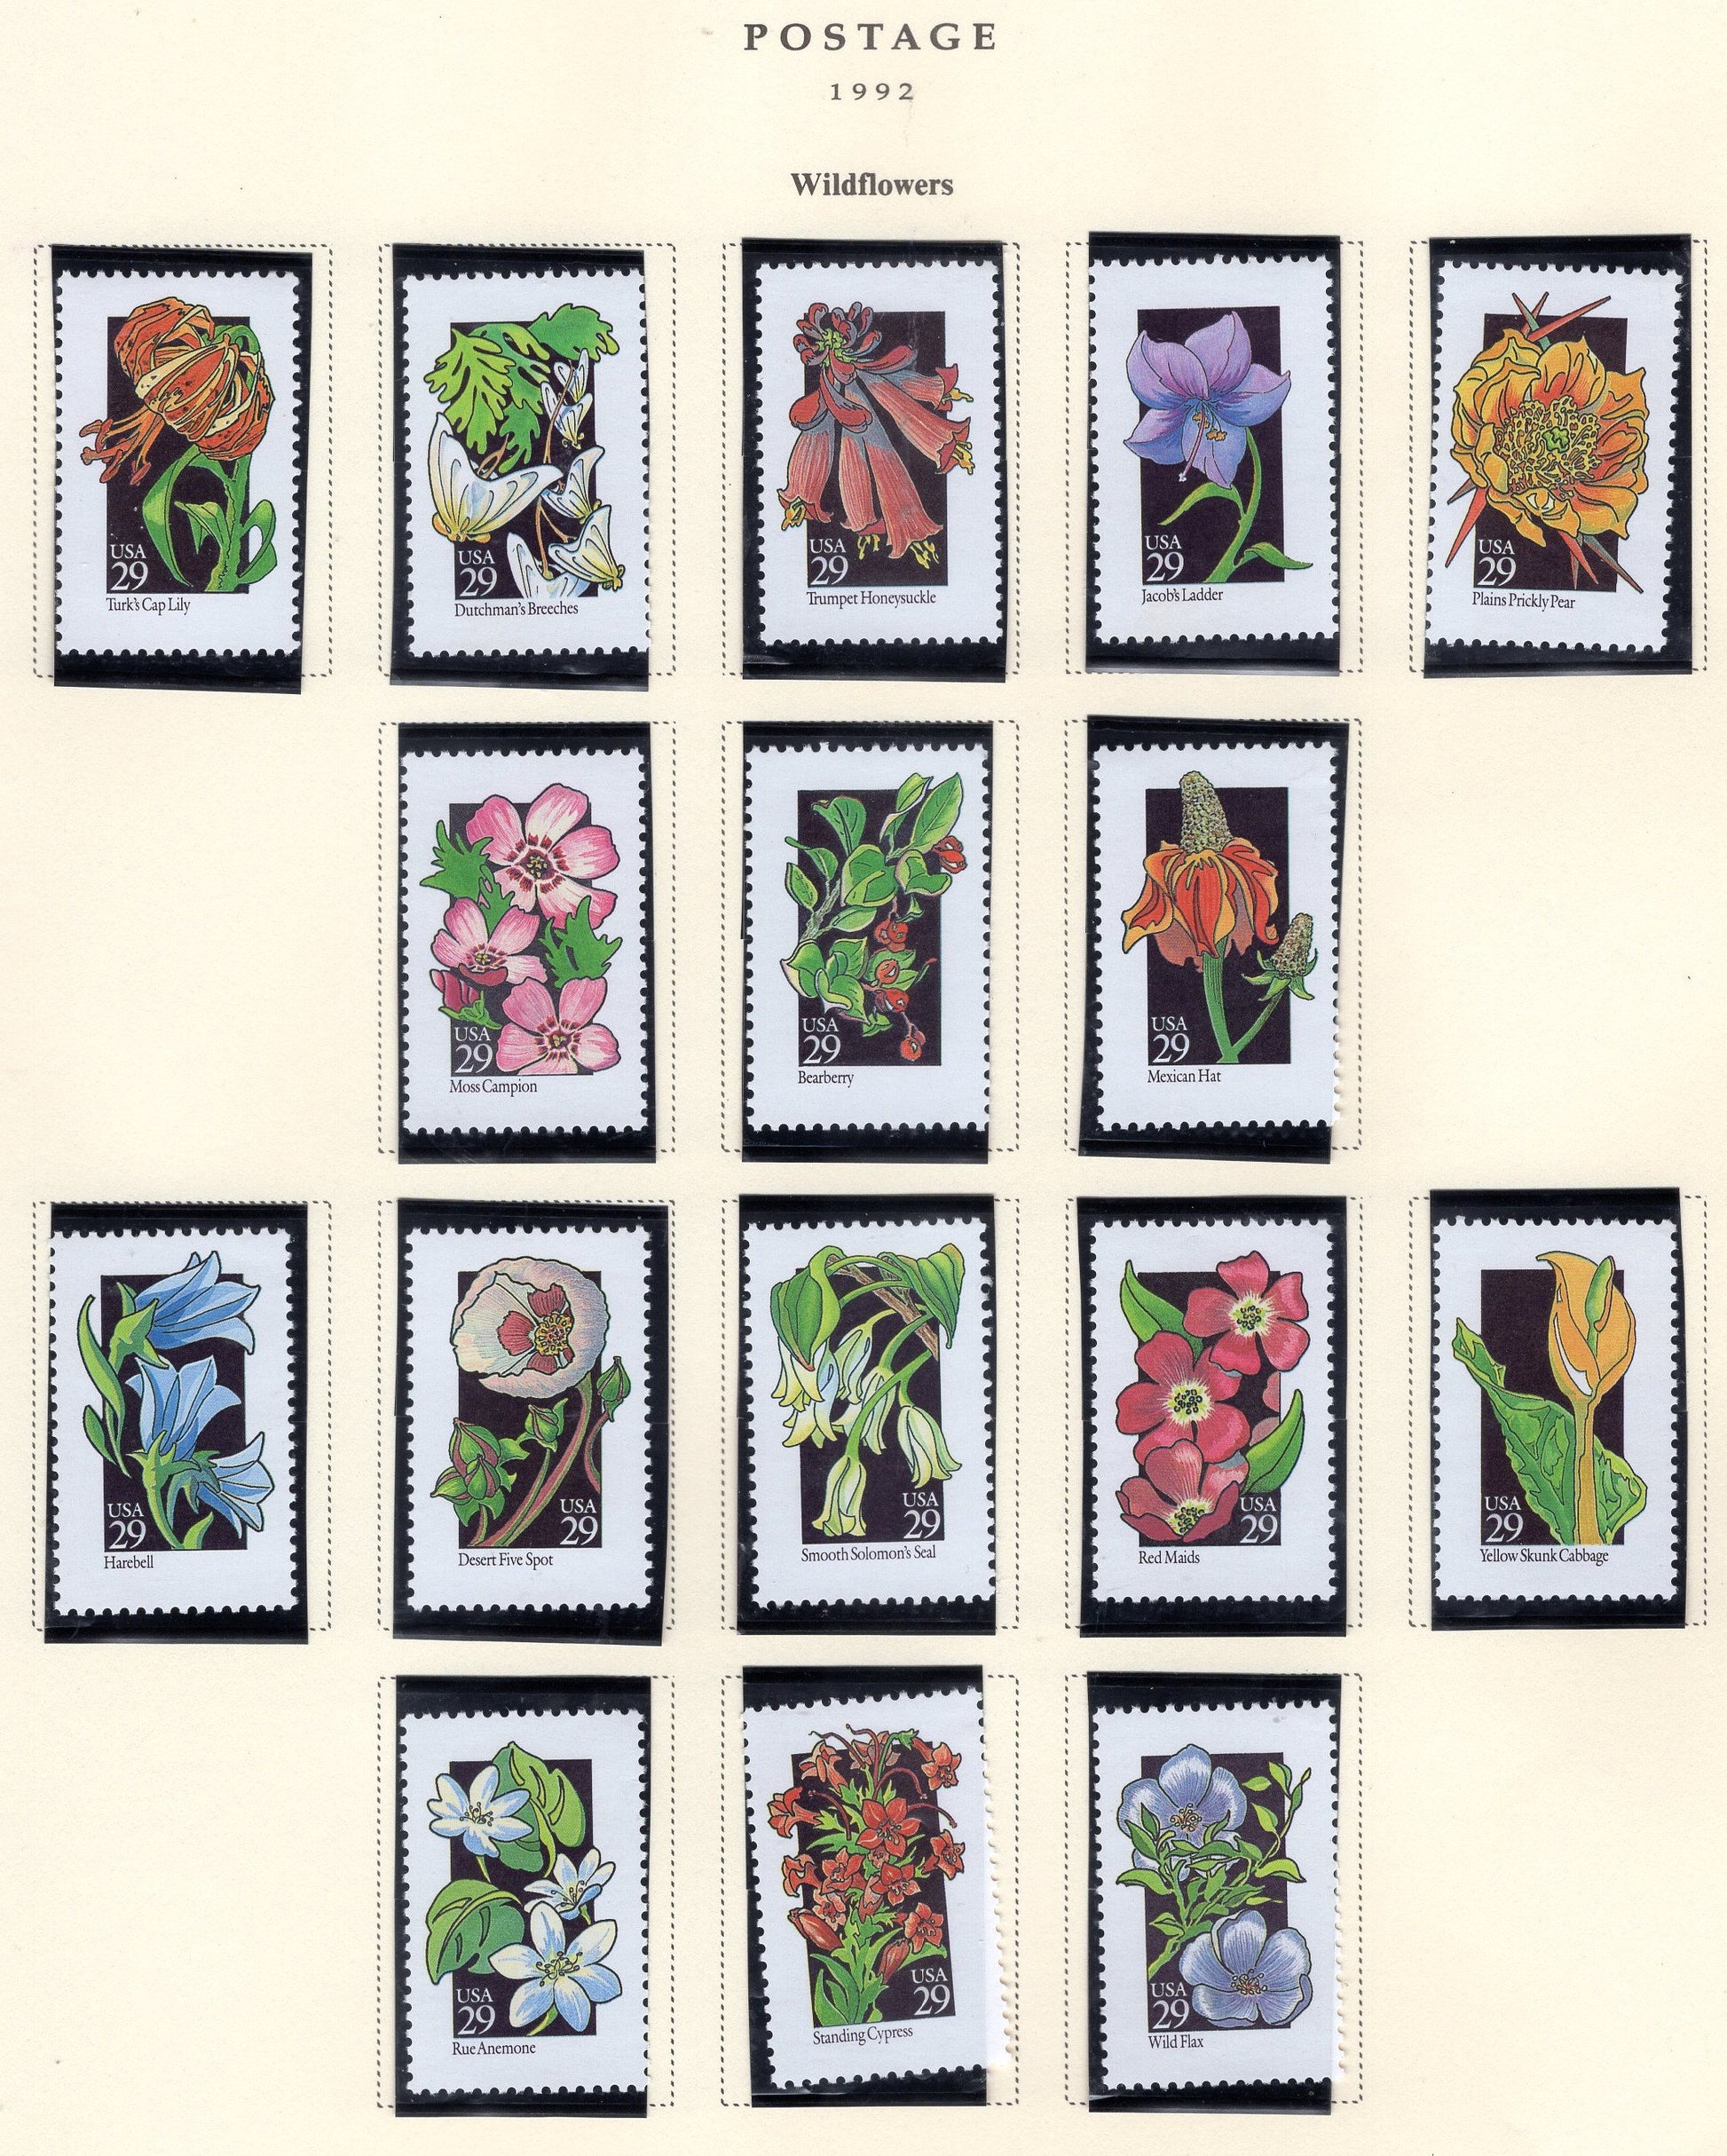 50 WILDFLOWERS WILD FLOWERS - All Different Fresh Bright USA 29c Stamps - Please See the 3 Scans - Issued in 1992 - s2647SN